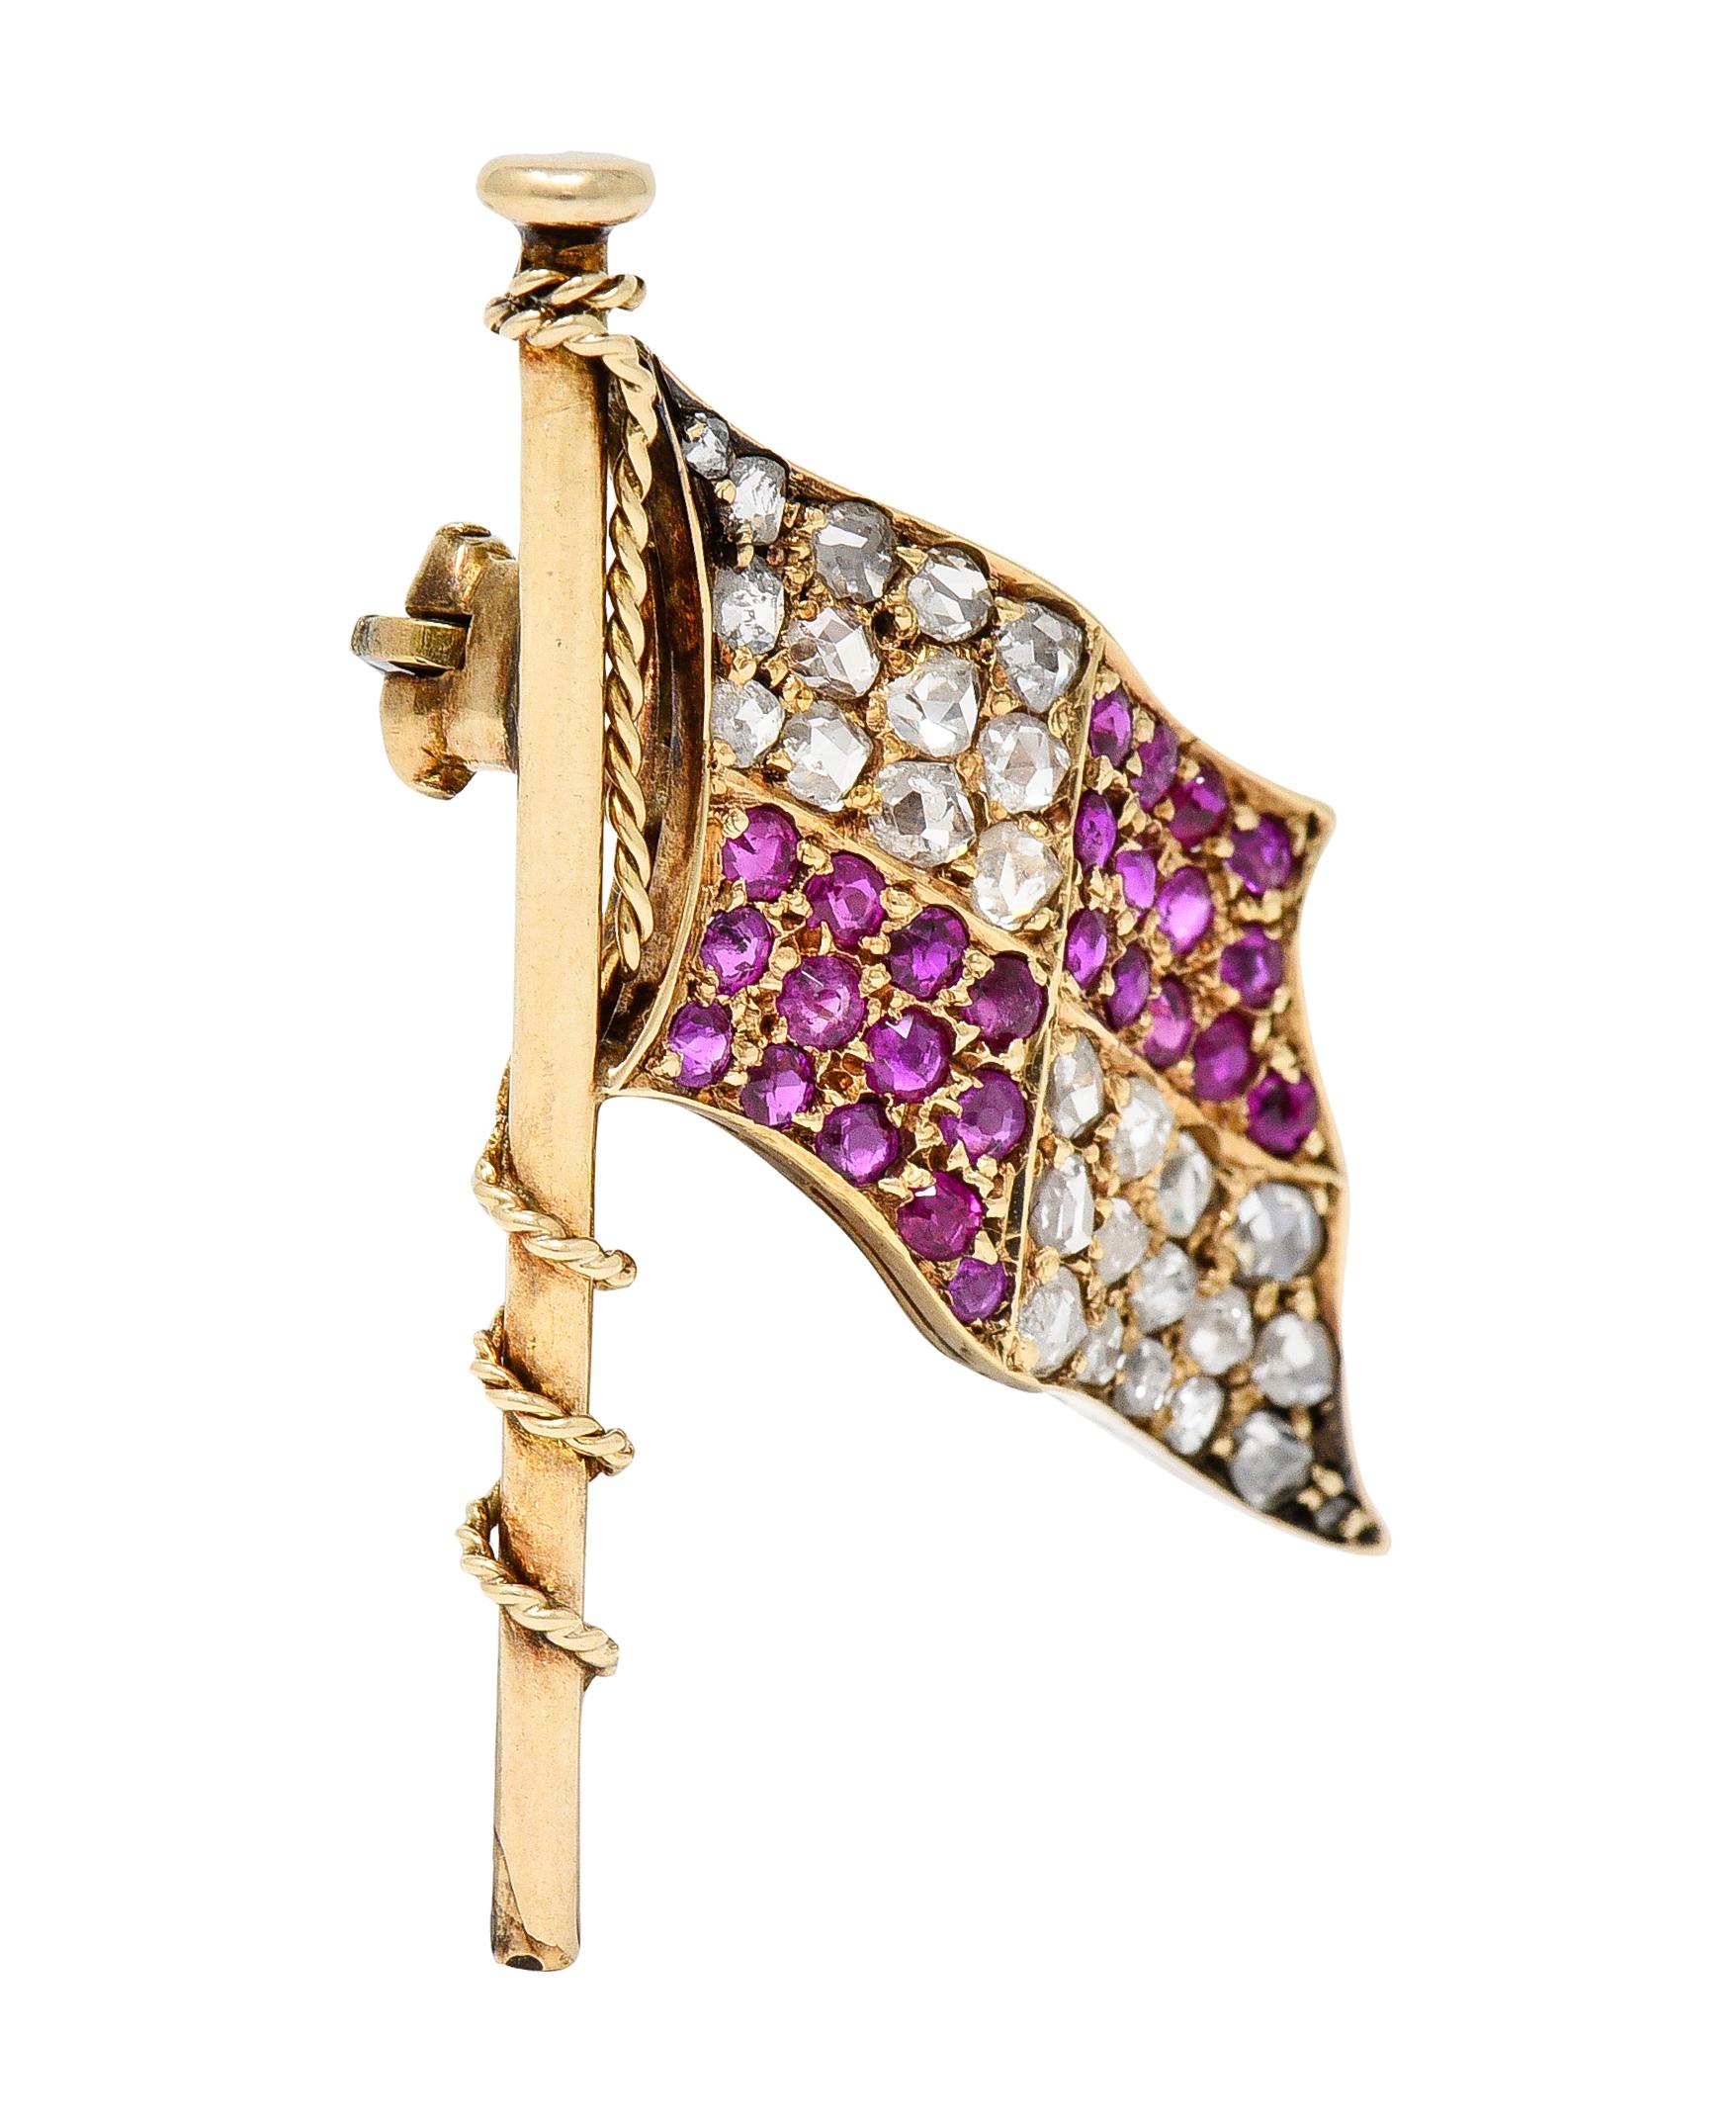 Victorian 1.78 CTW Ruby Diamond 14 Karat Gold Maritime Flag Antique Brooch In Excellent Condition For Sale In Philadelphia, PA